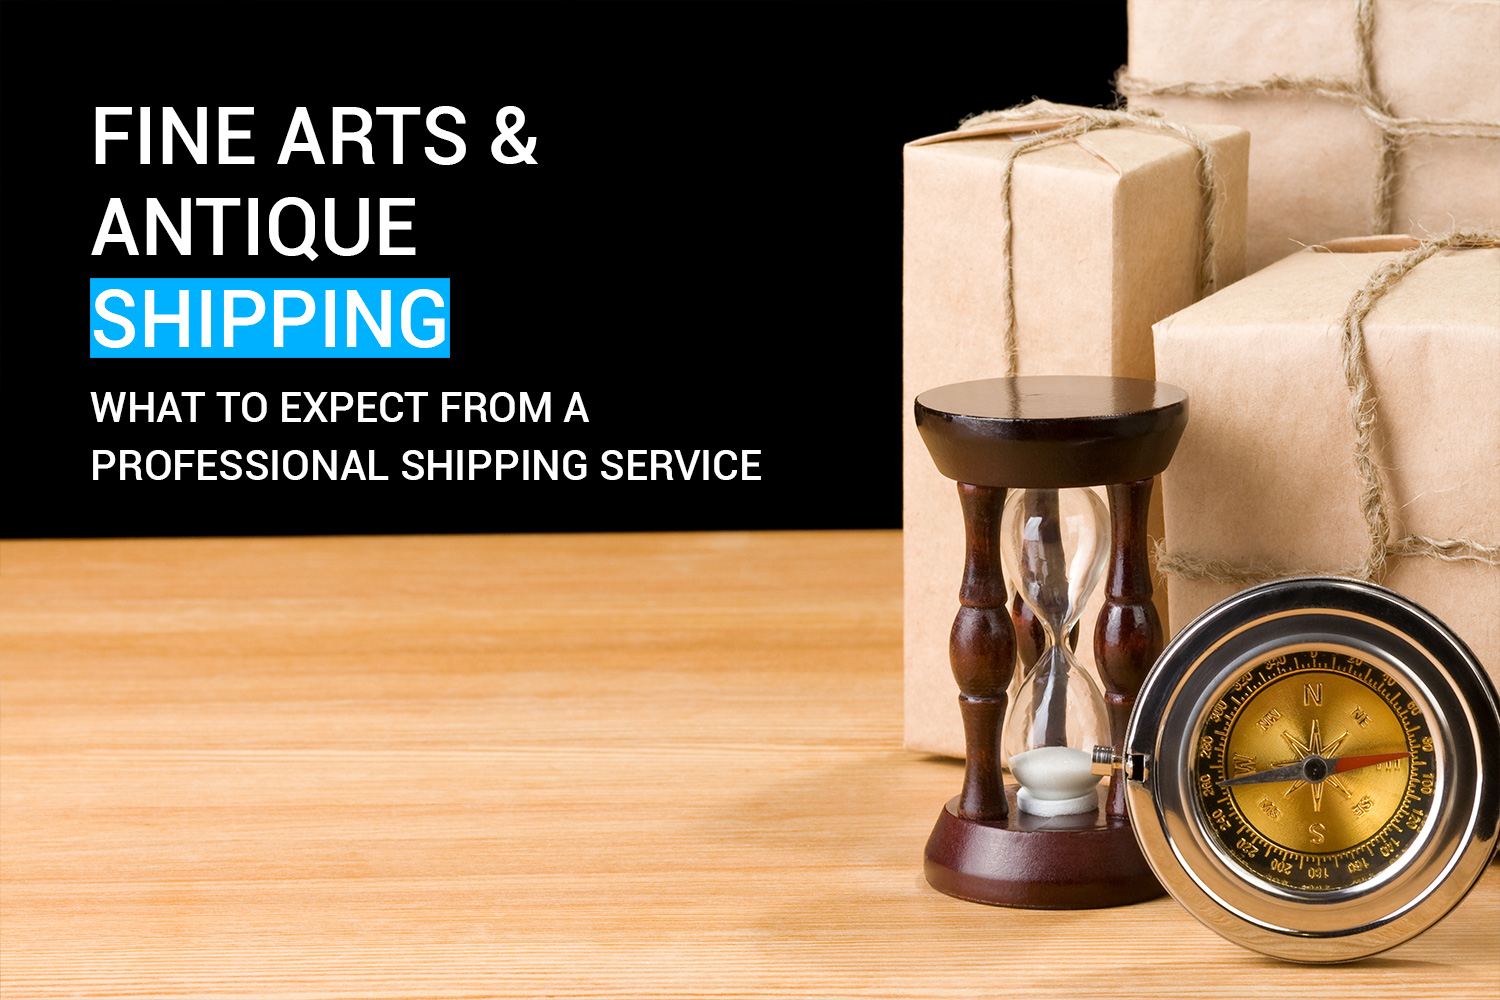 Fine Arts and Antique Shipping: What to Expect from a Professional Shipping Service